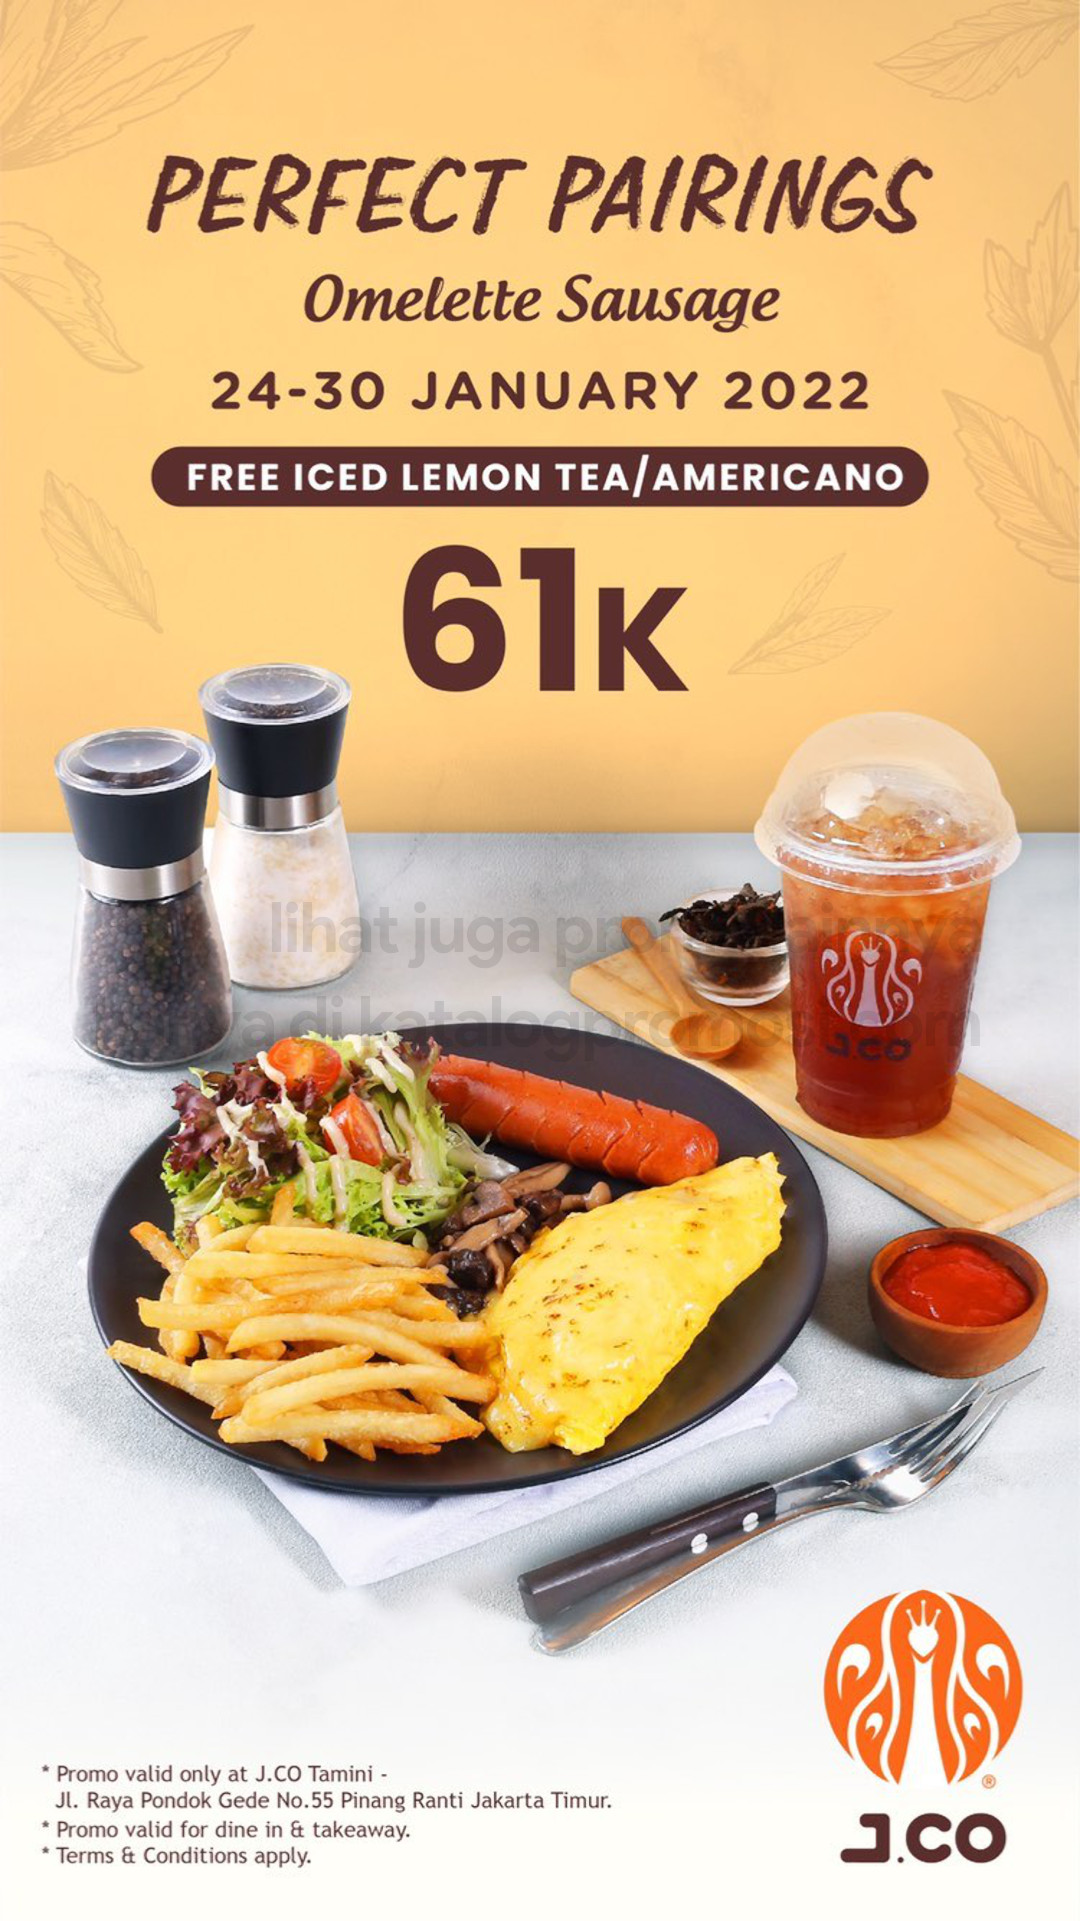 JCO Promo Get Free Iced Lemon Tea / Americano For Every Purchase of Omelette Sausage